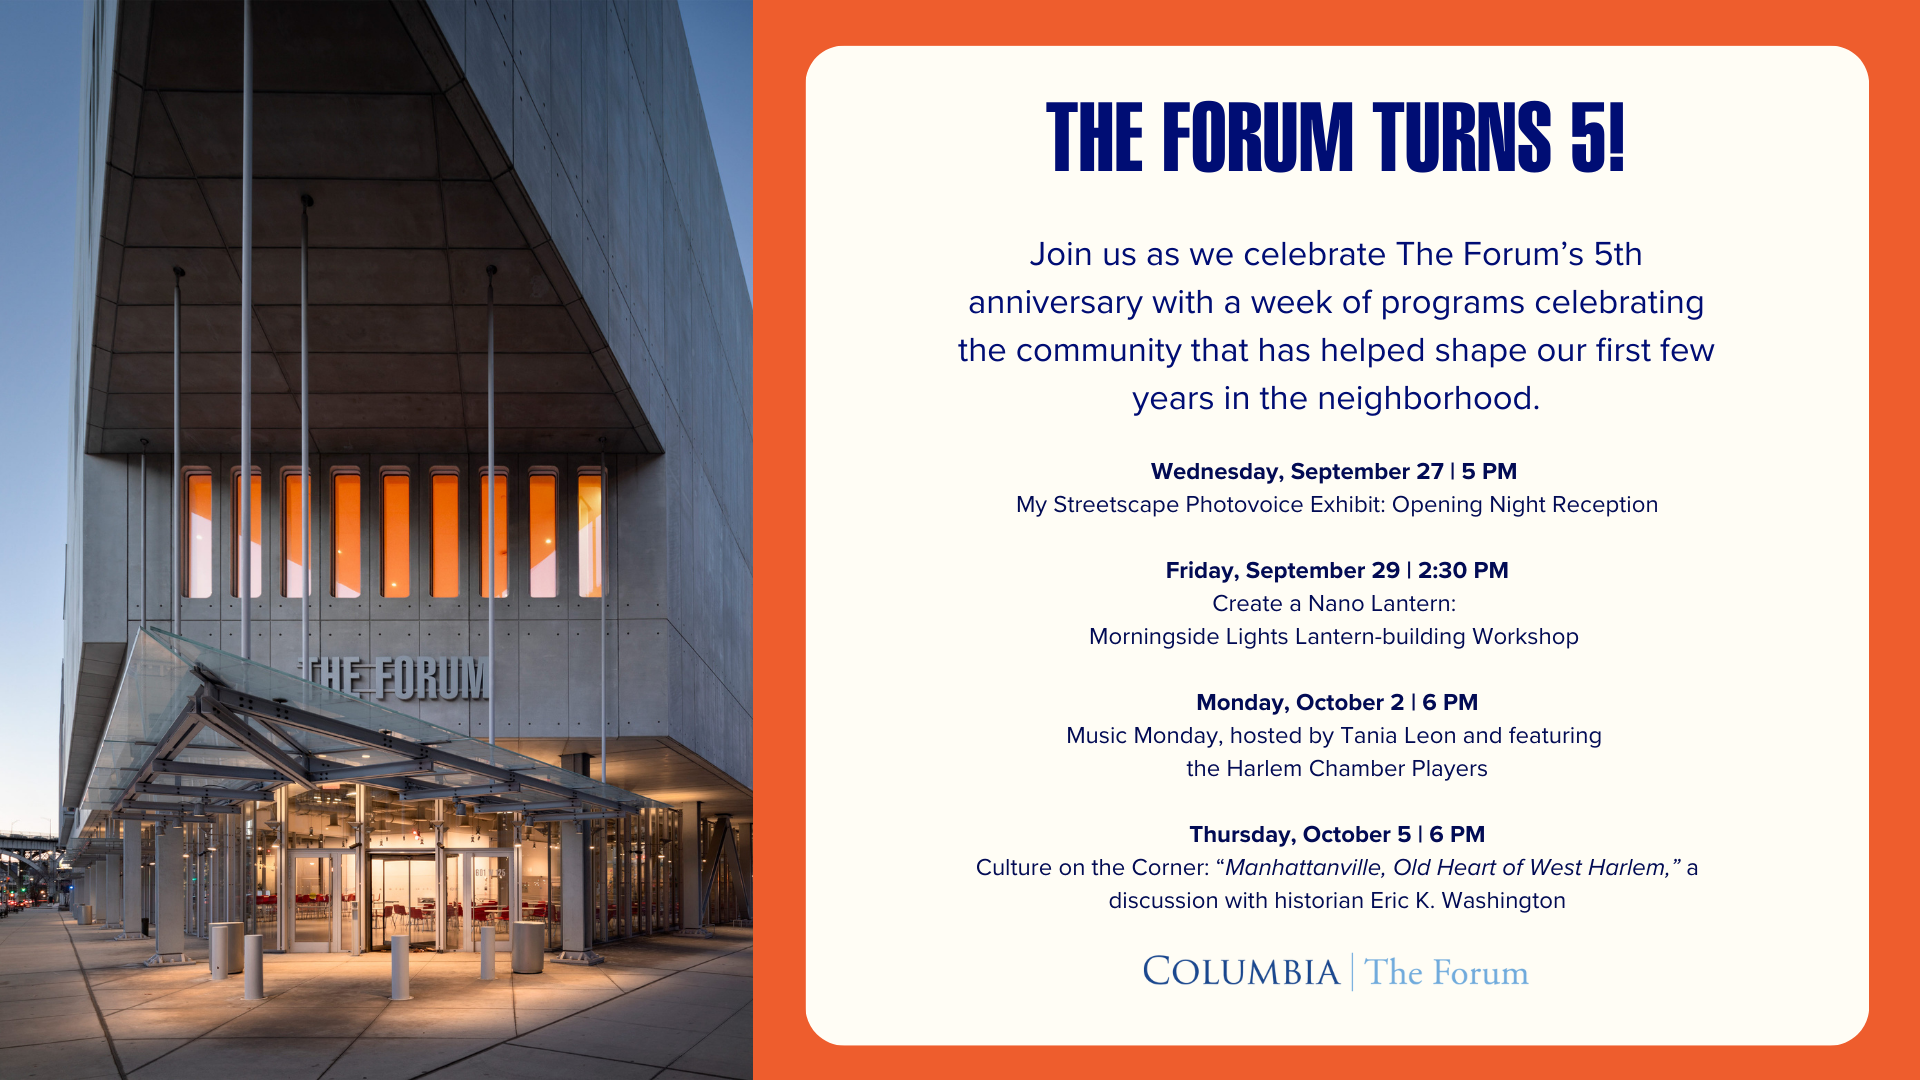 Graphic advertising The Forum's 5th Anniversary